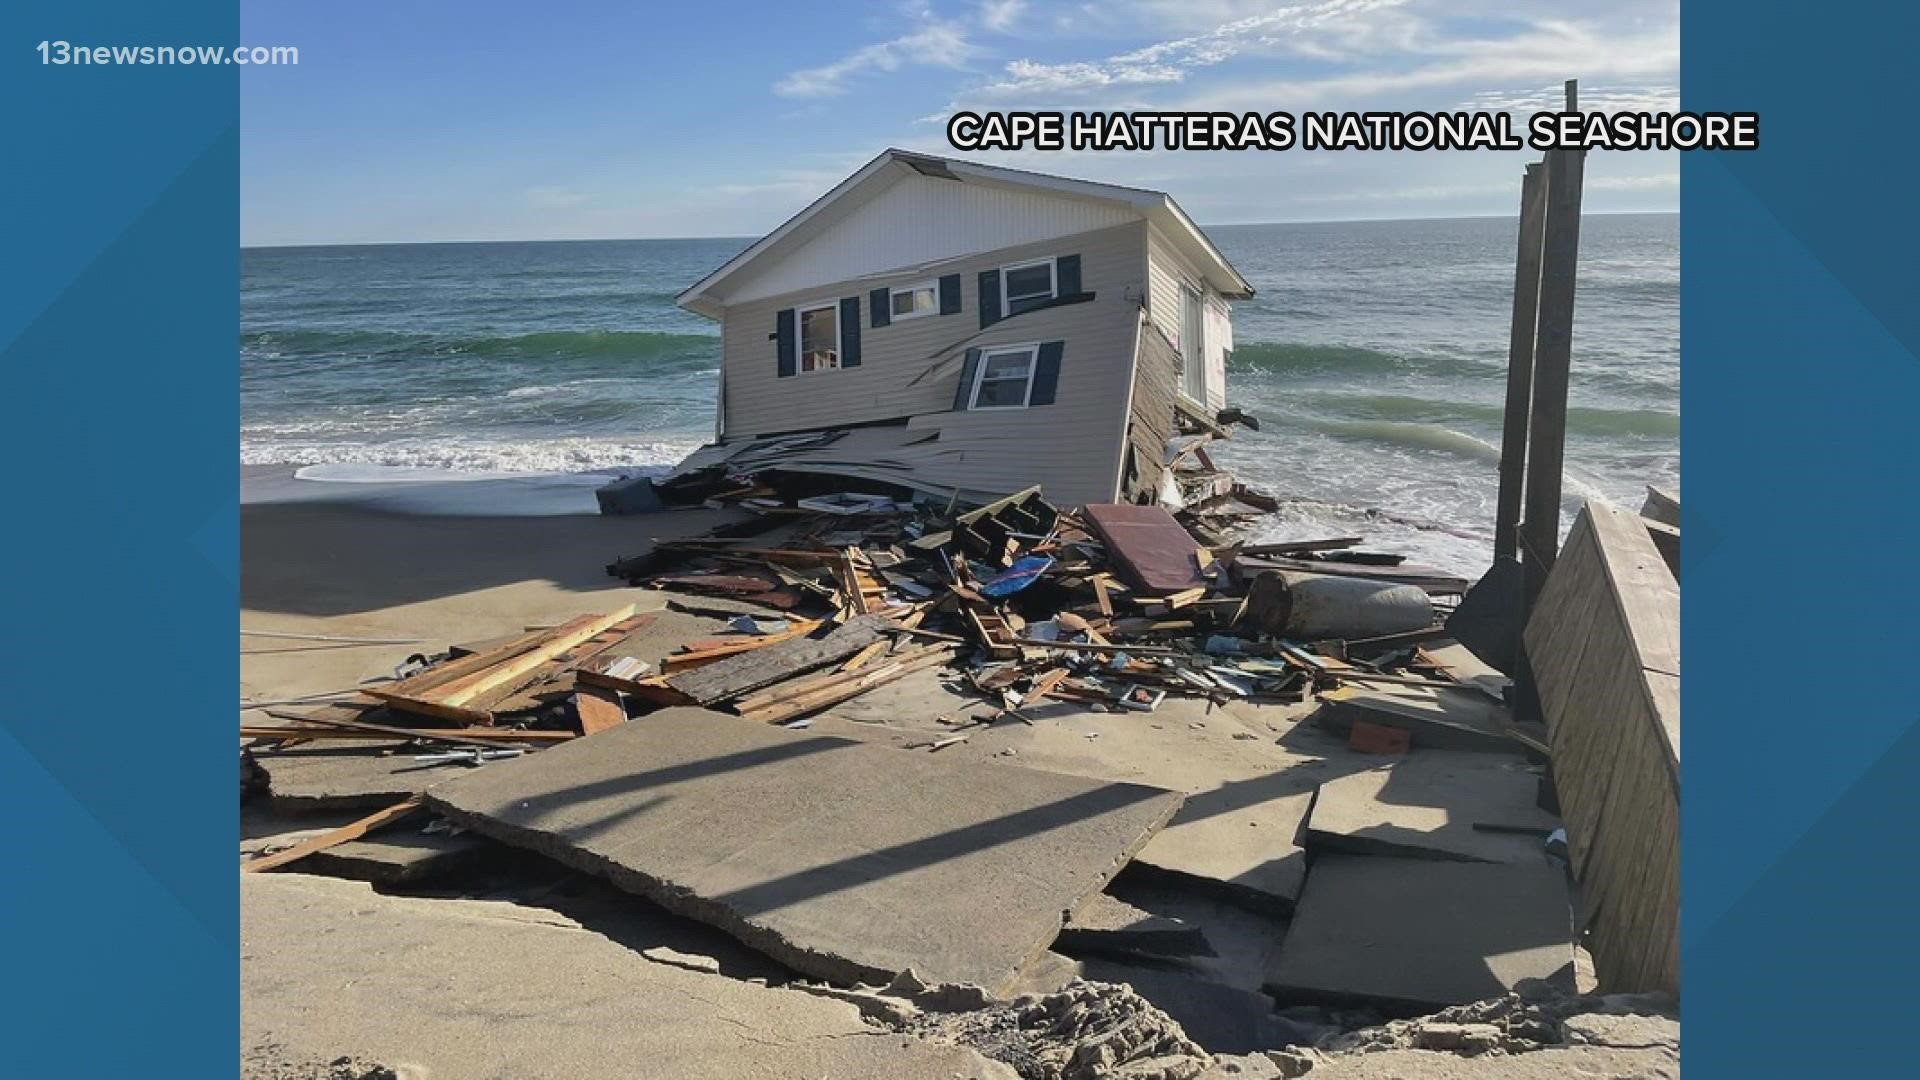 Rangers from Cape Hatteras National Seashore said people could see pieces of the home scattered between Rodanthe and Salvo.